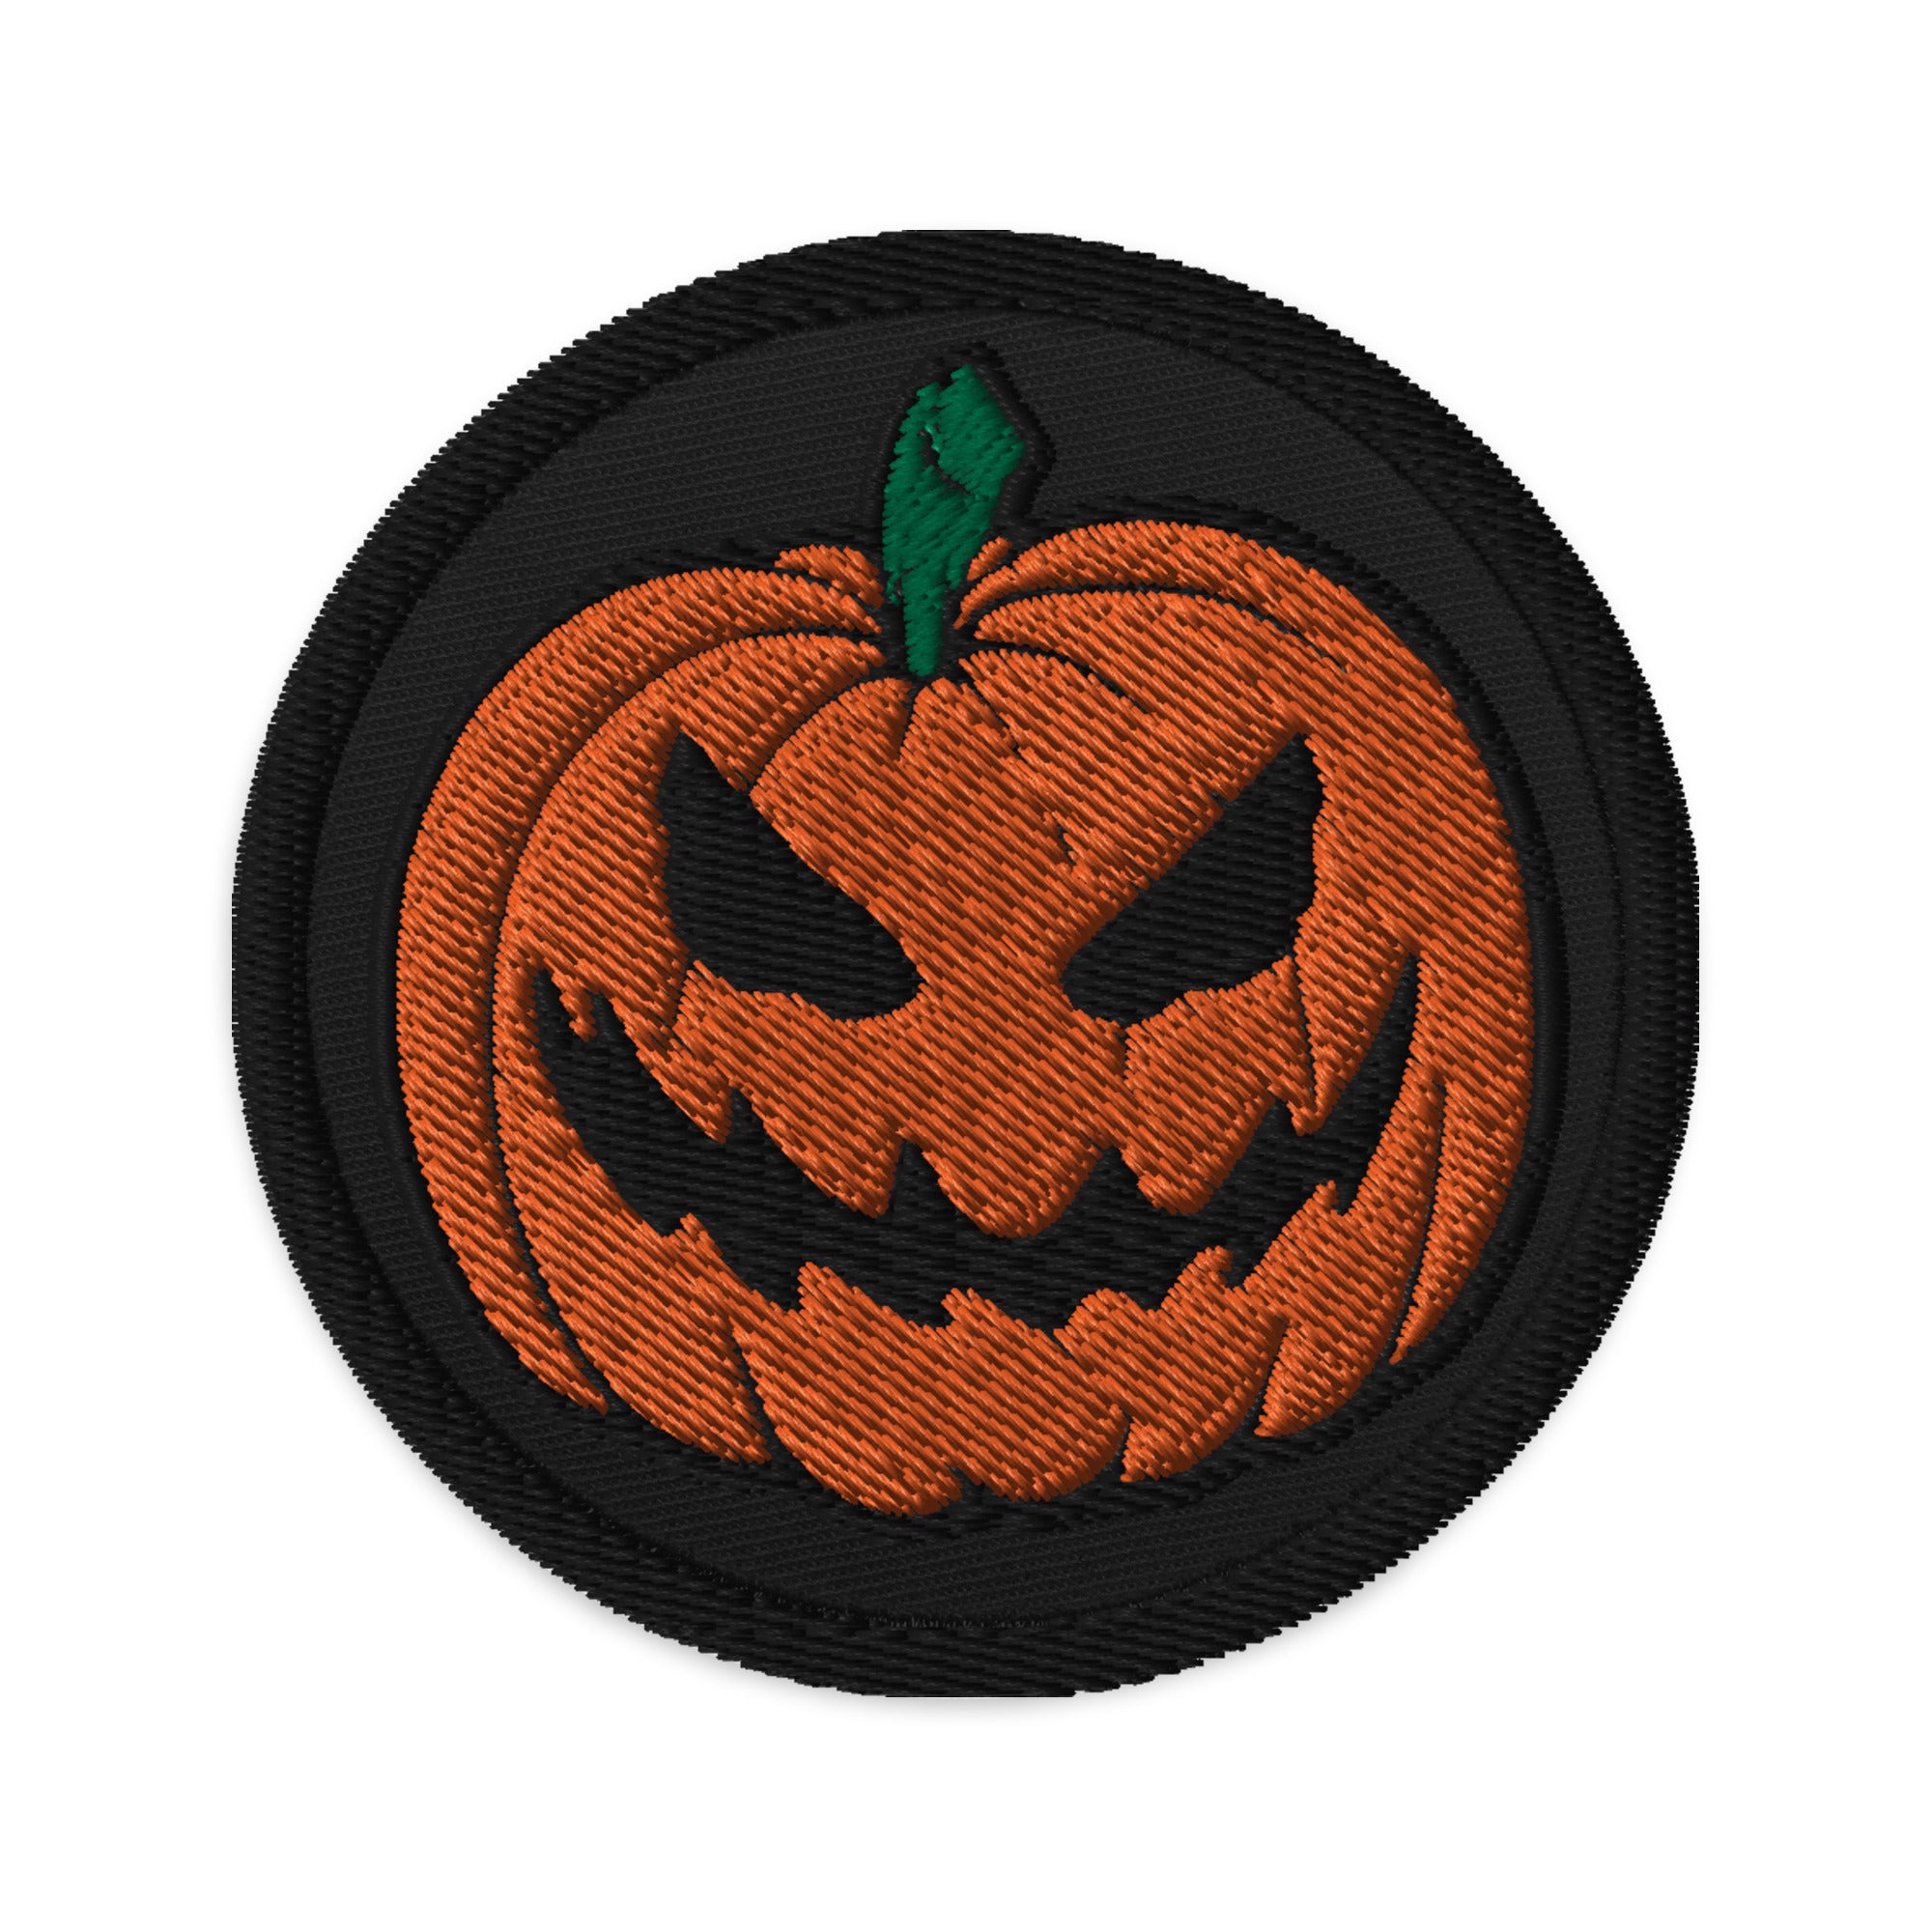 Scary Jack O Lantern Halloween Pumpkin Embroidered Patch - Edge of Life Designs